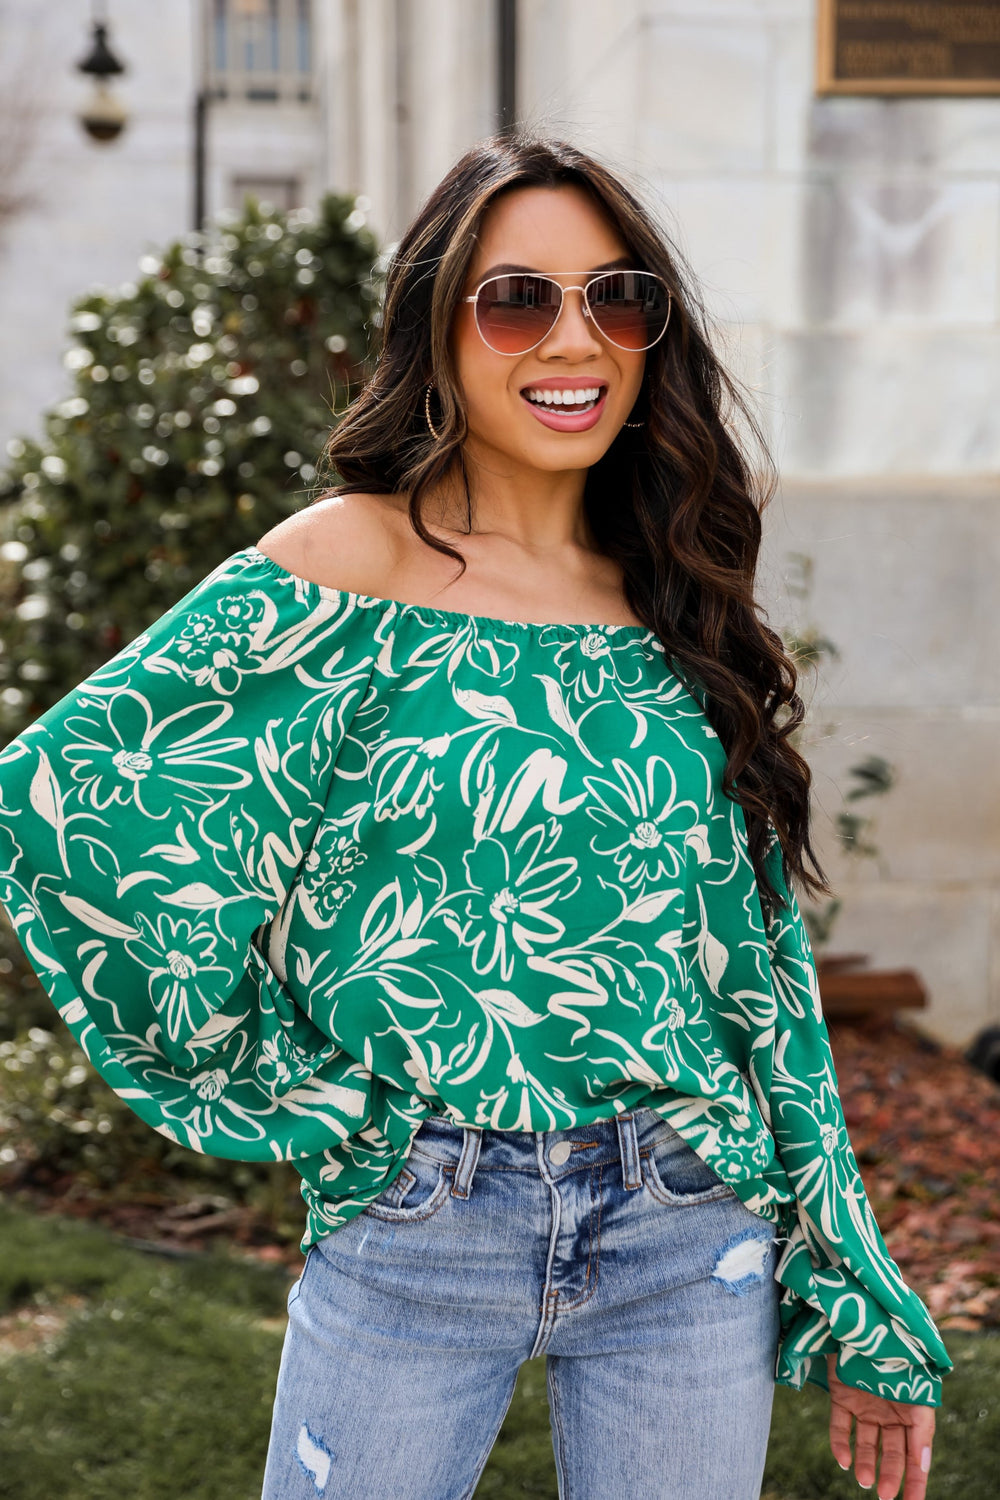 Darling Quality Green Floral Blouse cute tops for spring